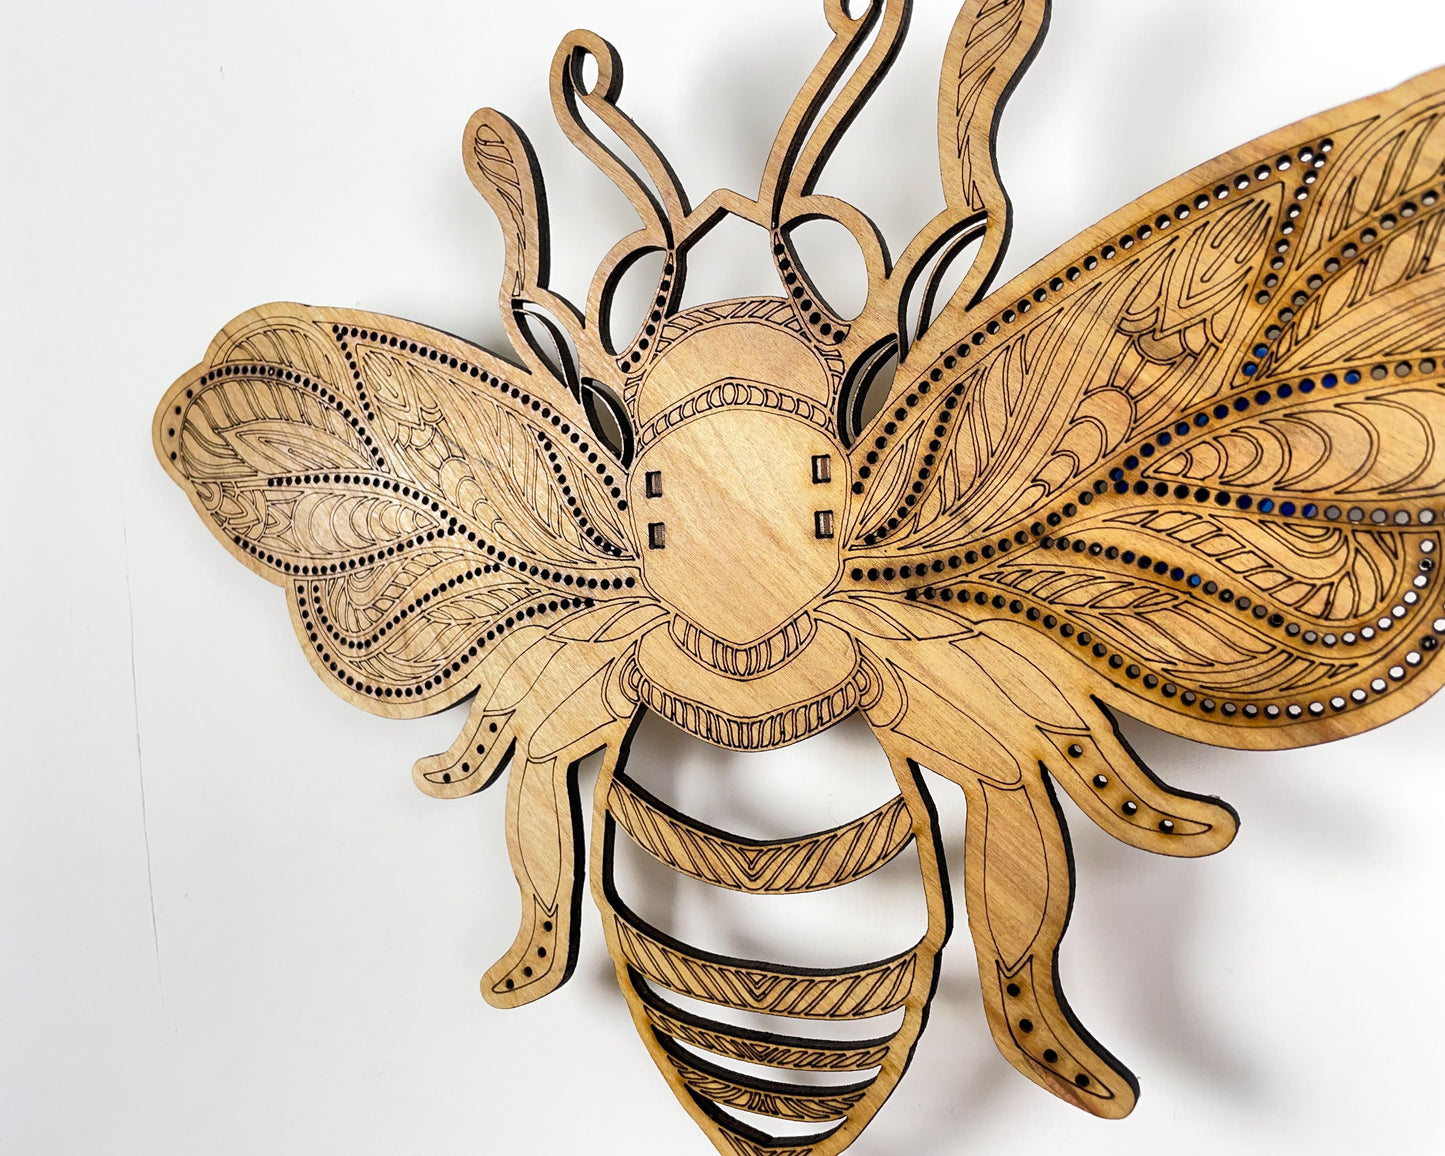 Bumble Bee Jewelry Holder